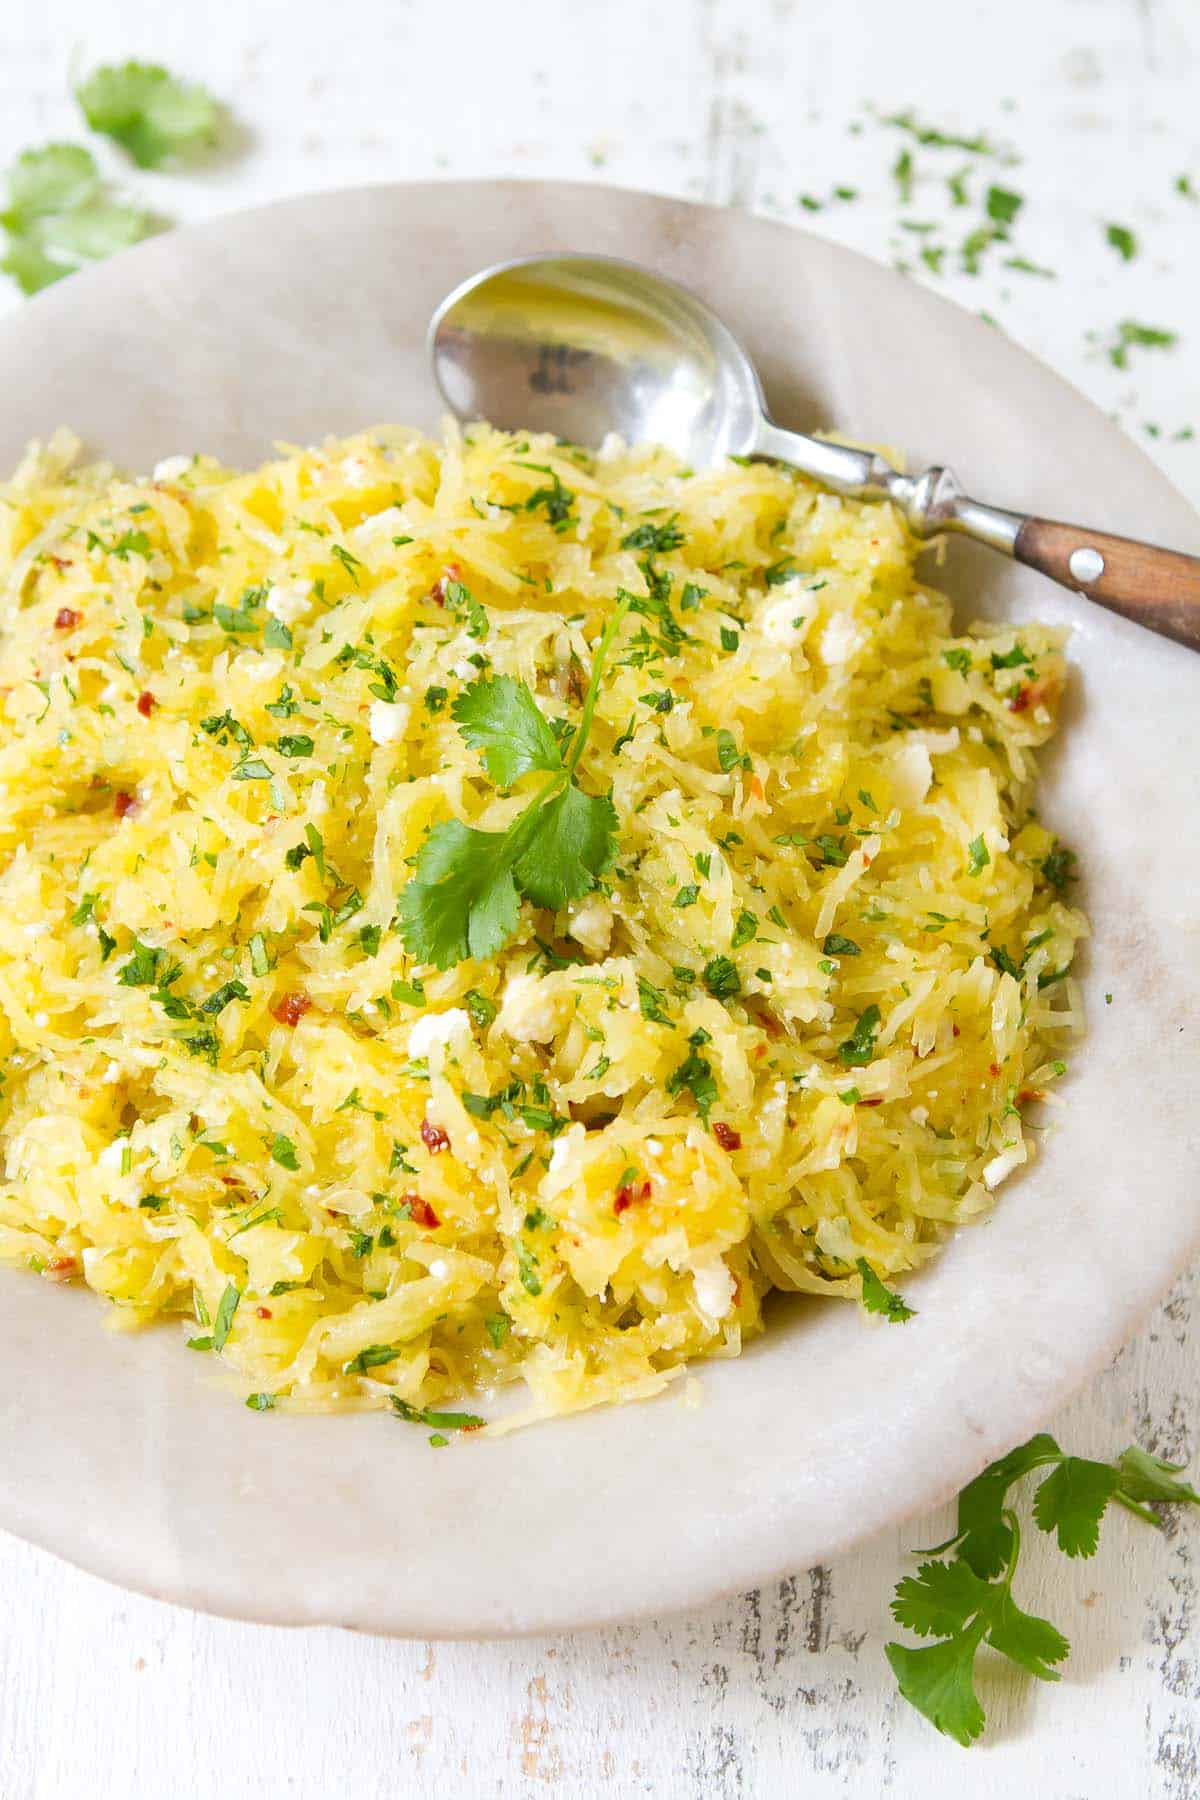 You can never have too many spaghetti squash side dish recipes! Less than 10 minutes of active prep needed! This southwest version gets its flavor from smoky chipotle peppers and salty queso fresco.  | Recipes | Healthy | Vegetarian | Easy